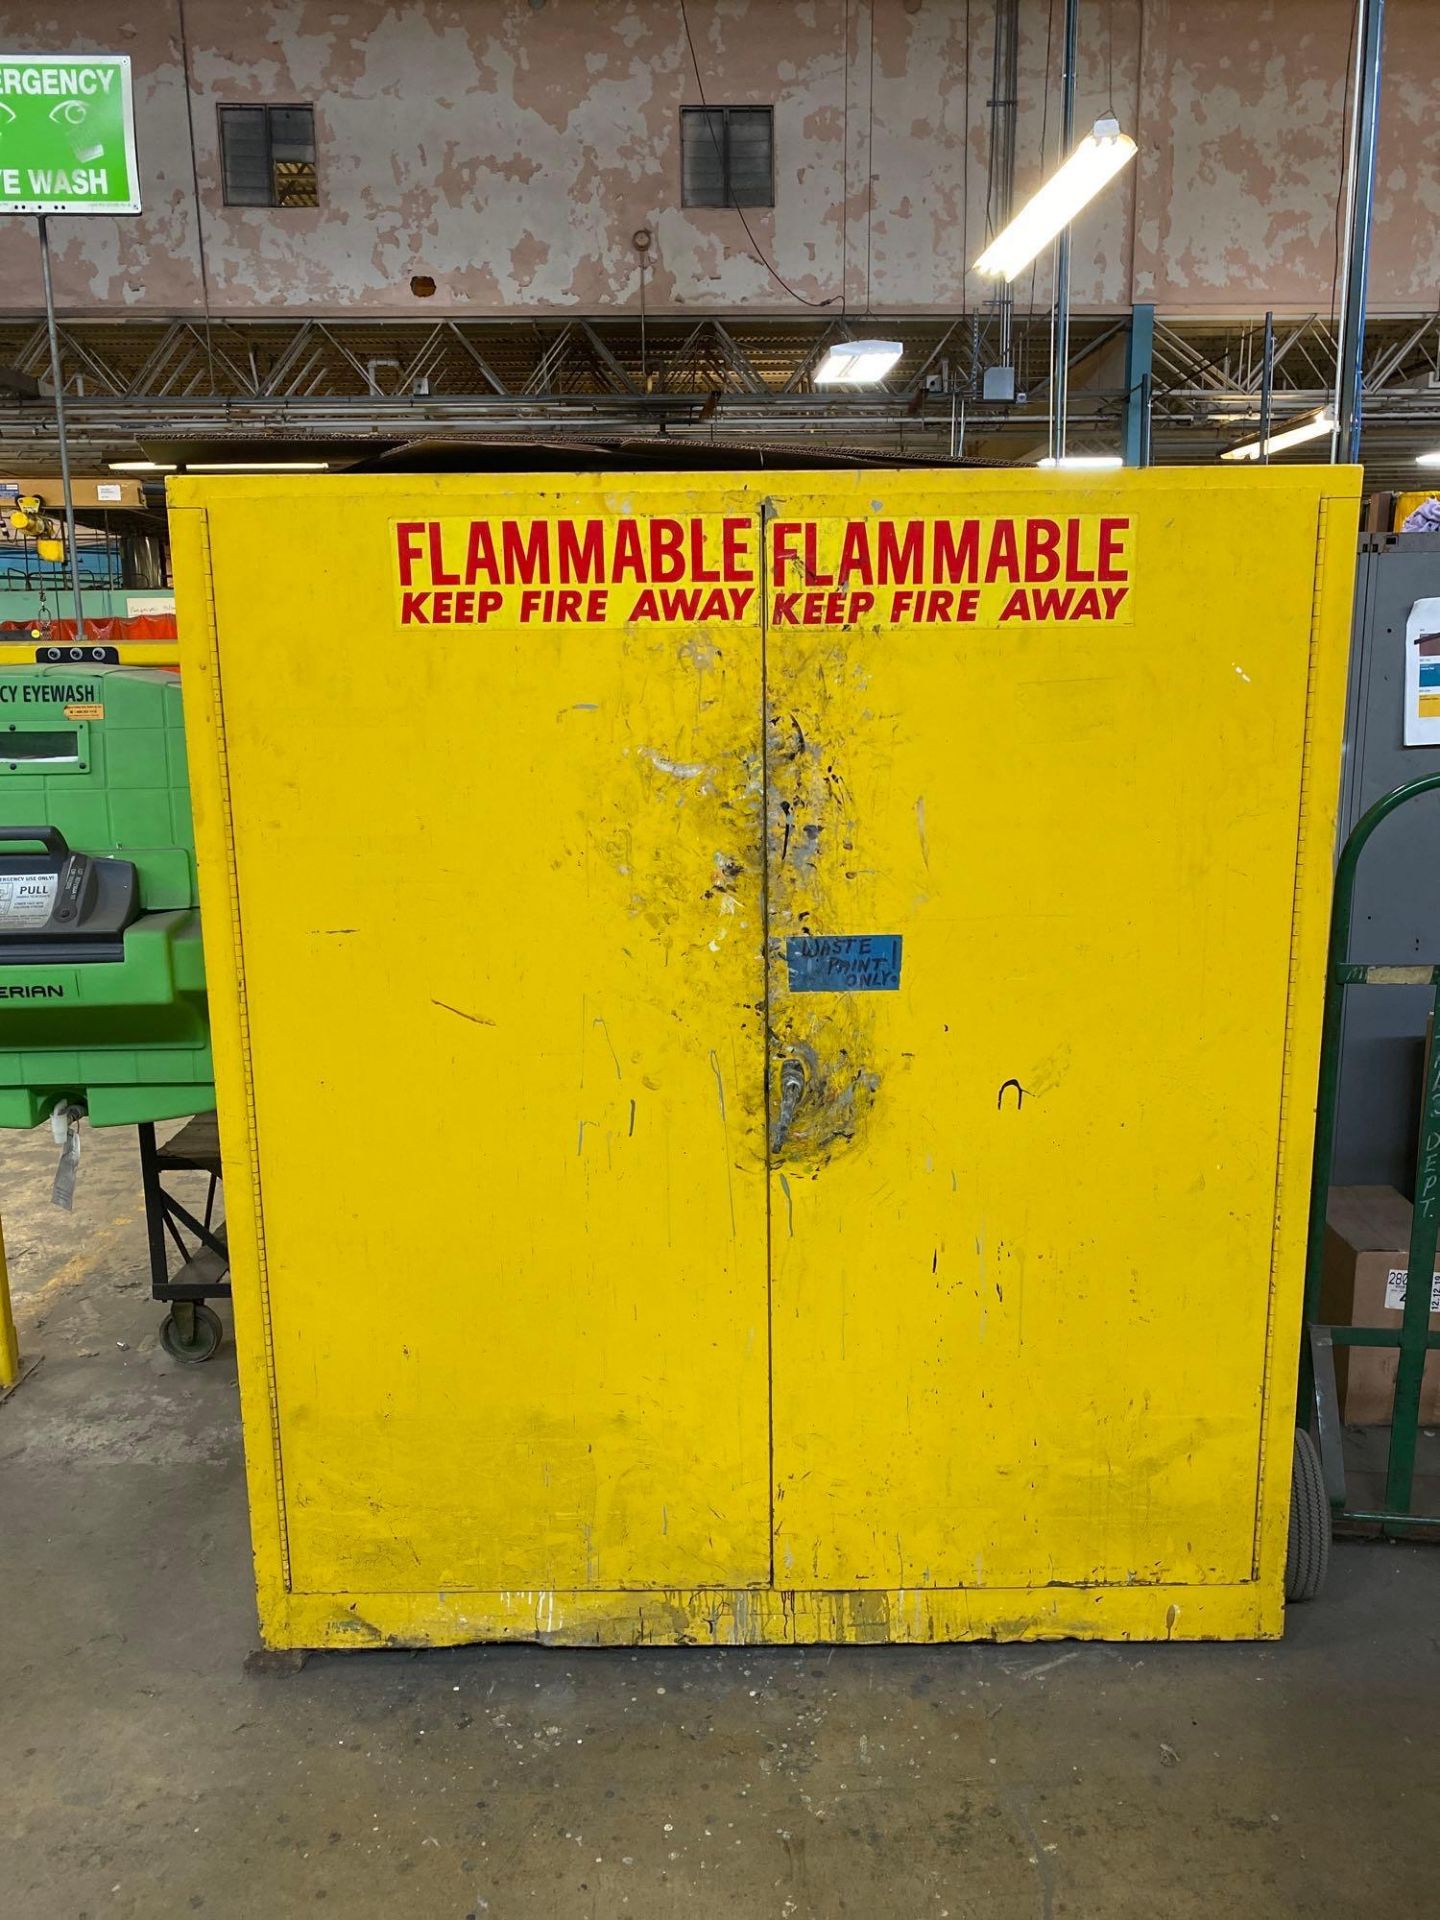 2 - 55 Gal Drum Flammable Storage Cabinet, 110 Gallon Capacity